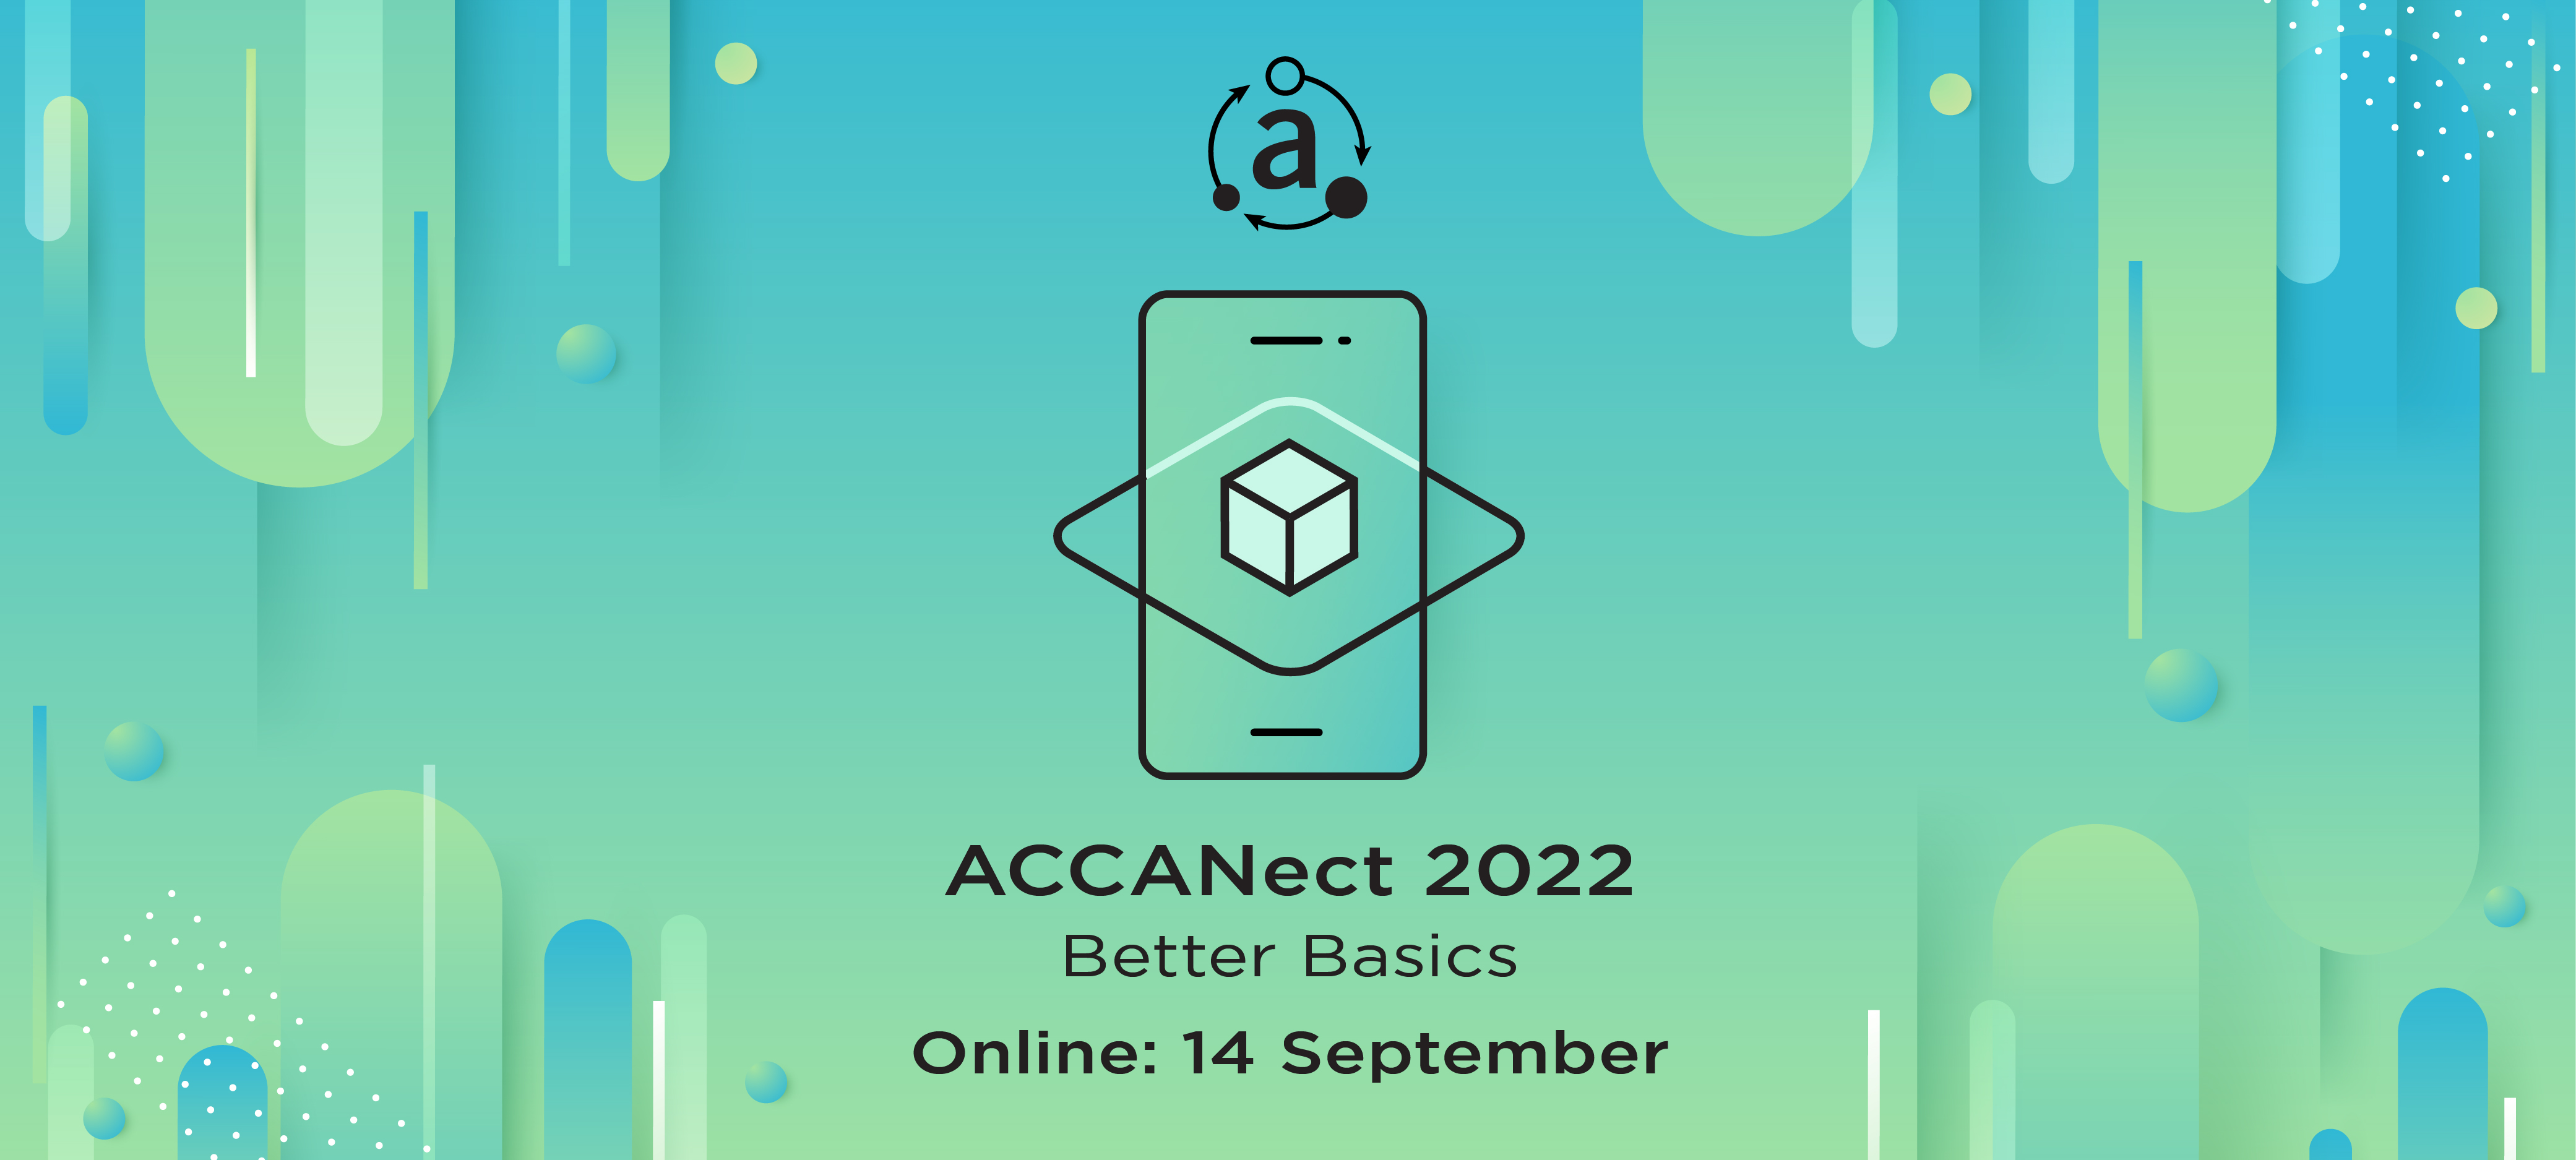 ACCANect 2022 Better Basics Online: 14 September [icon of a phone with an ACCAN conference logo]